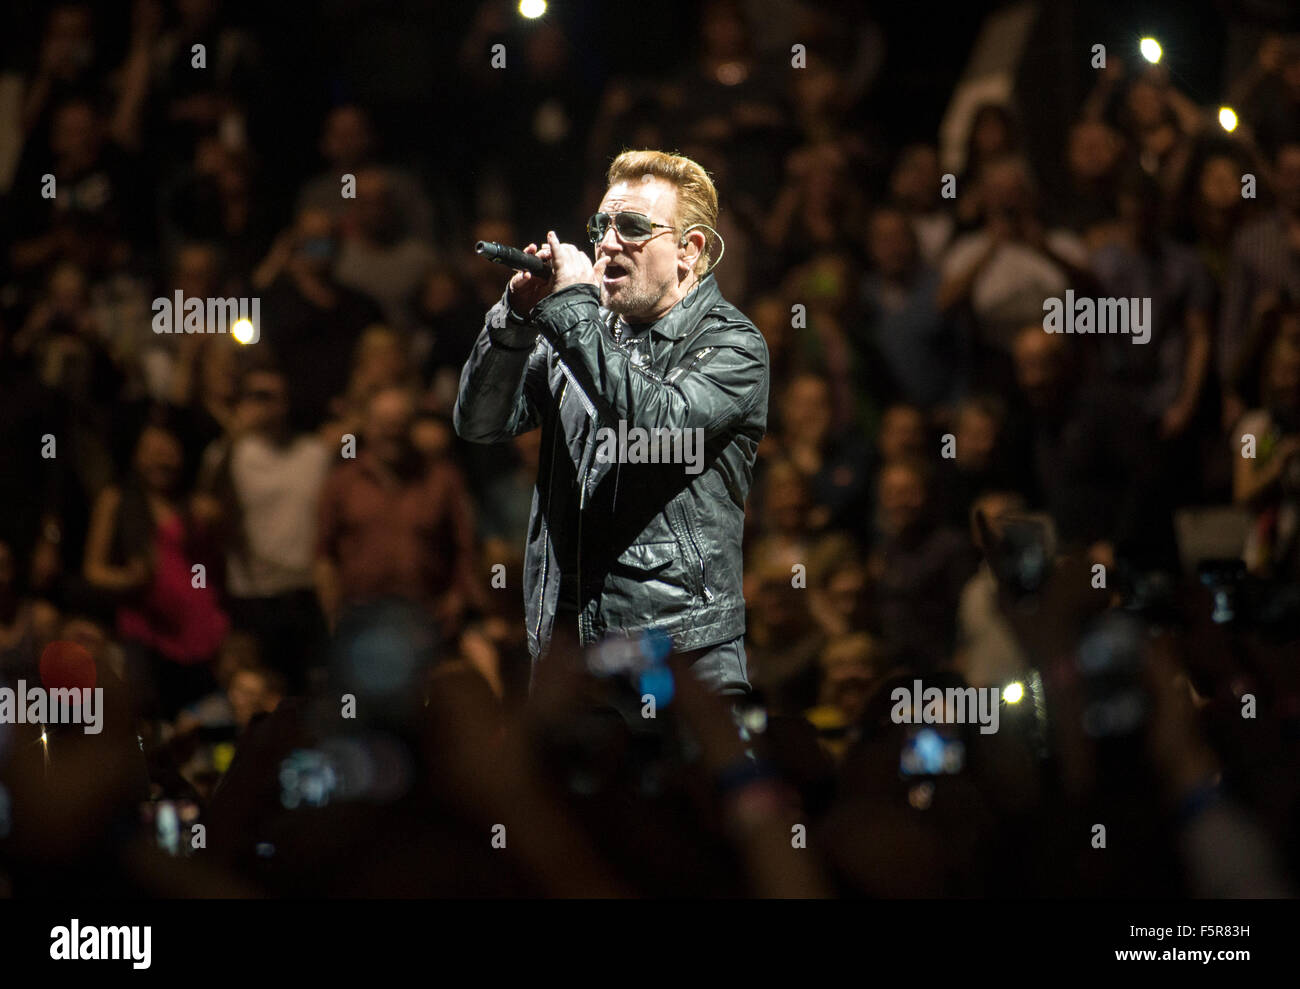 Bonoof U2 performs at the SSE Hydro as part of their iNNOCENCE + eXPERIENCE tour on November 6, 2015 in Glasgow, Scotland. Stock Photo